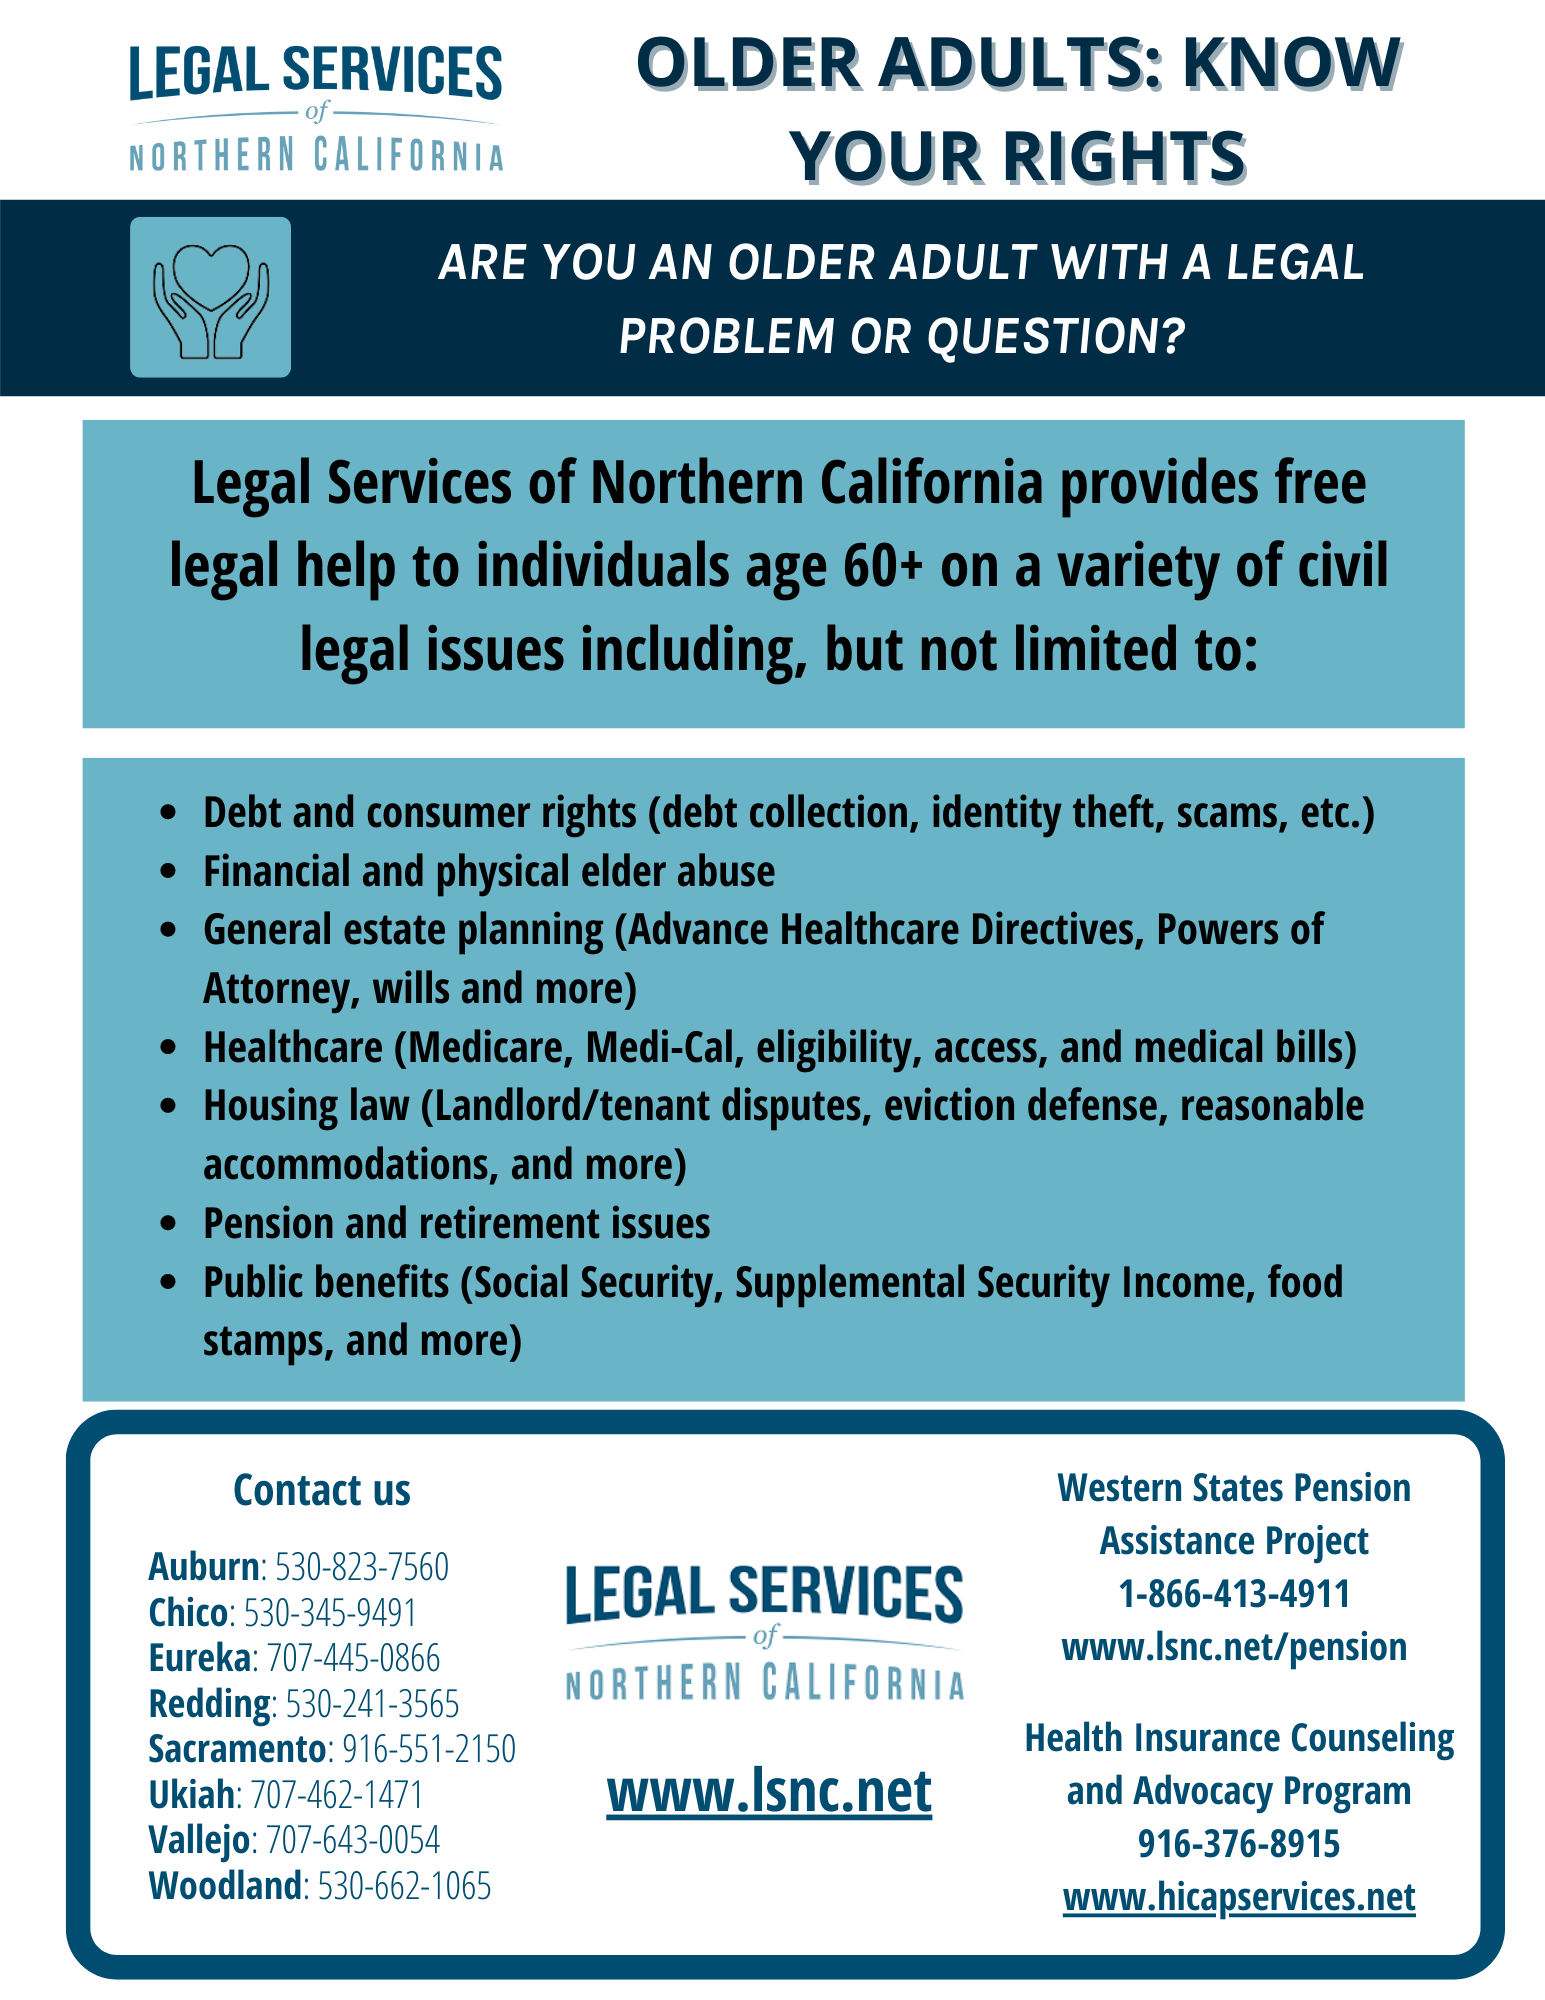 How to Contact Us  Legal Services of Northern California